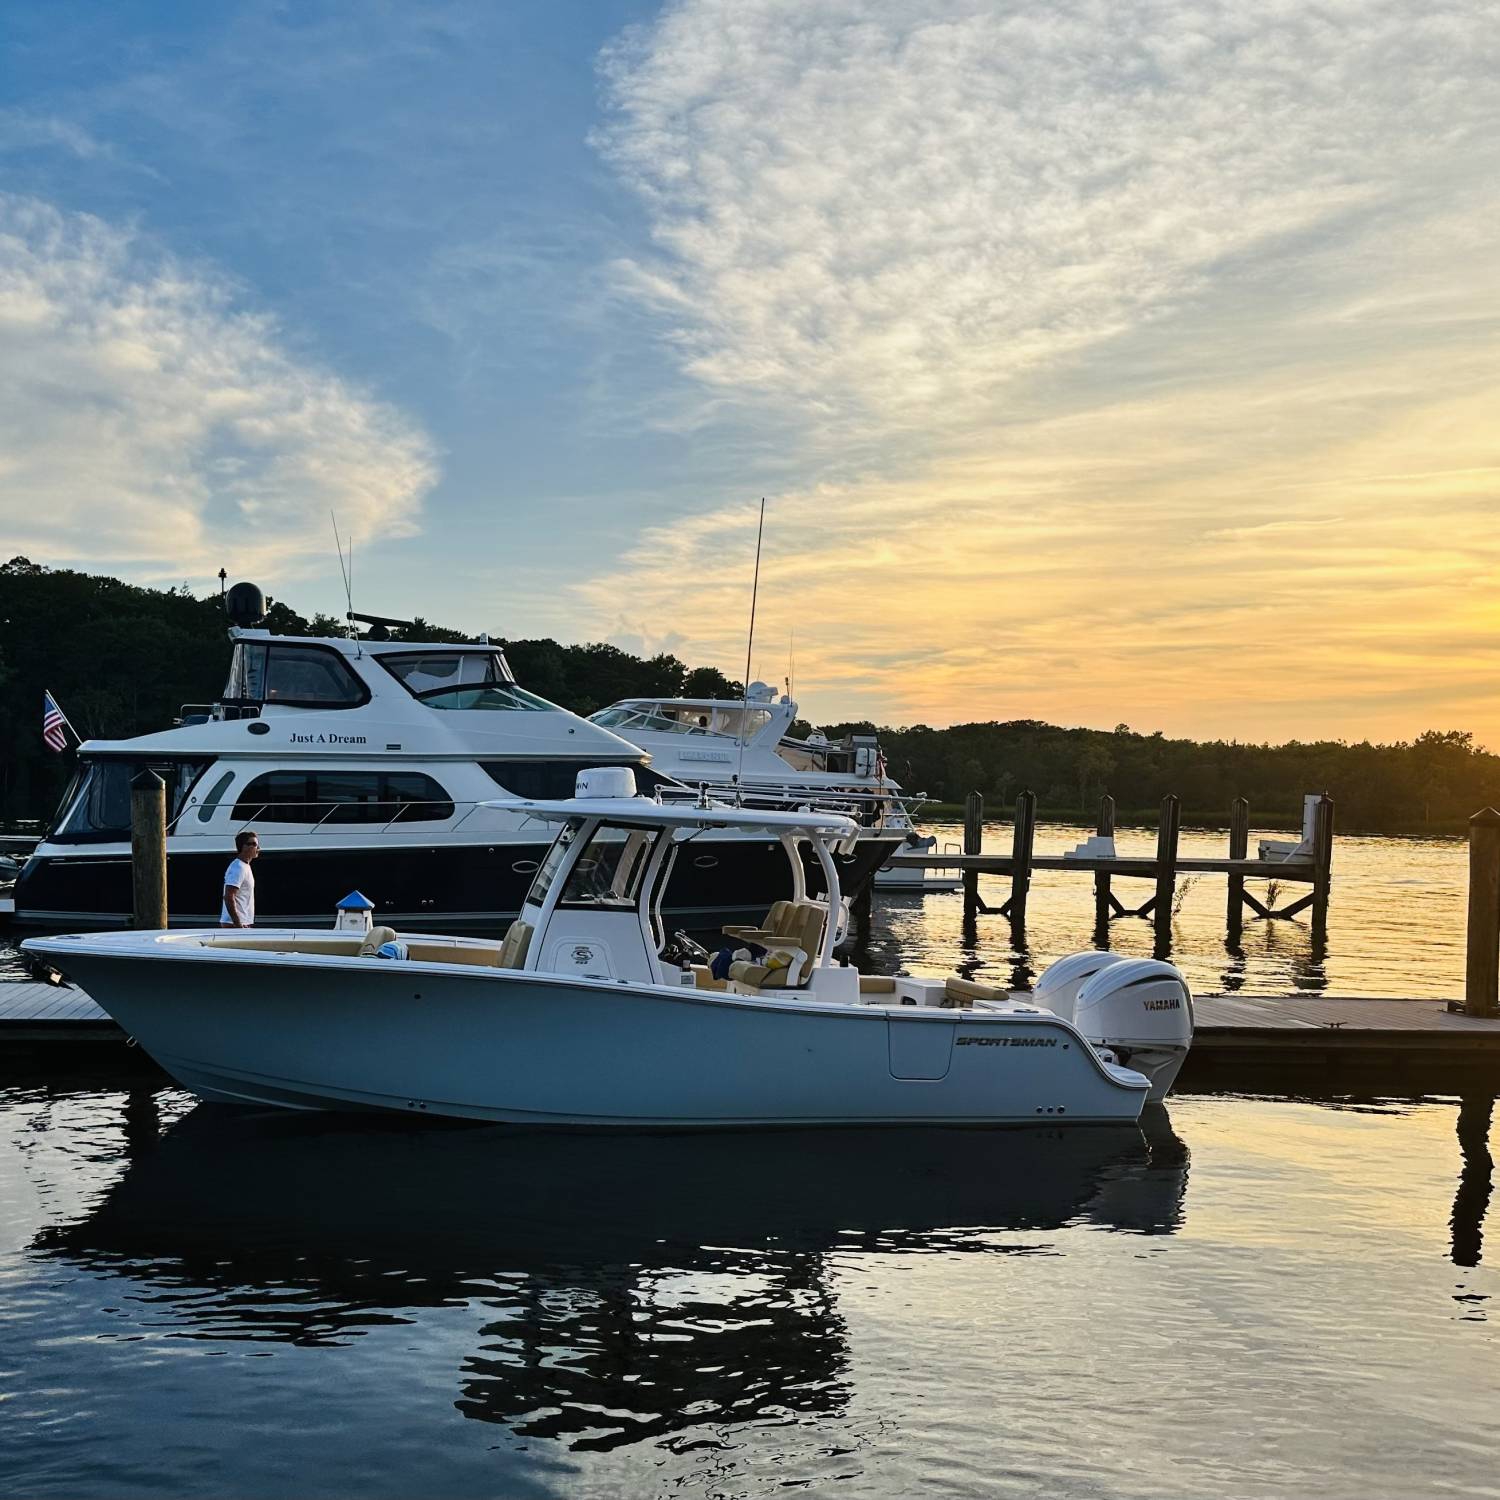 Title: Open 282 Sunset - On board their Sportsman Open 282 Center Console - Location: Wacca Wachee Marina, Murrells Inlet SC. Participating in the Photo Contest #SportsmanJanuary2024